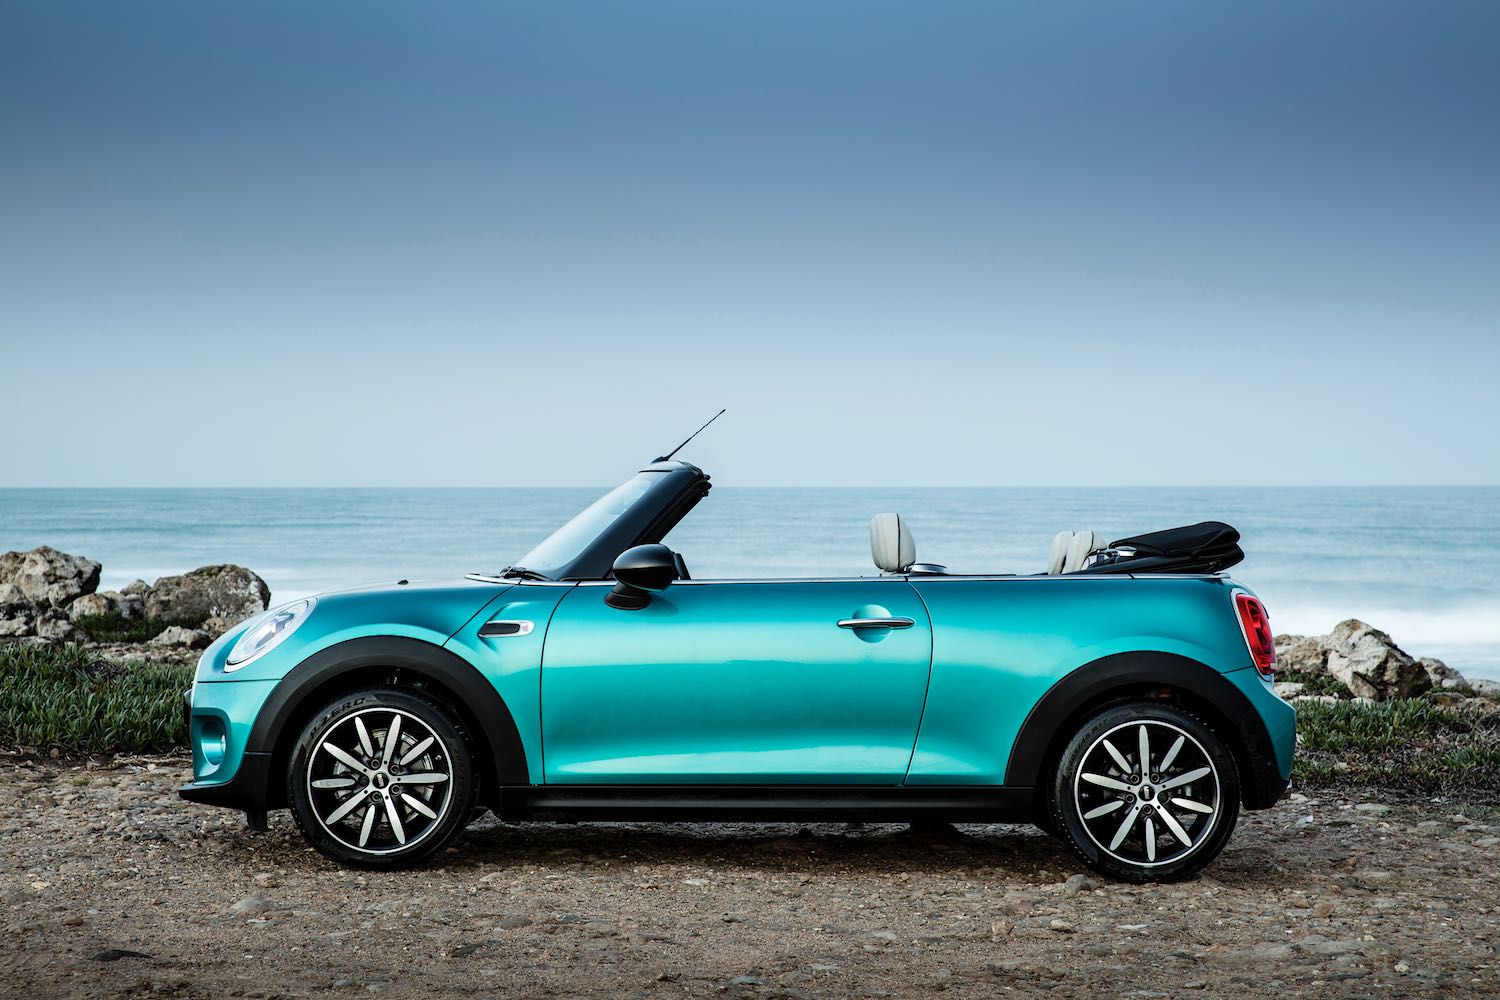 Neil Lyndon reviews the Best selling open top MINI Cooper Convertible for Drive 1